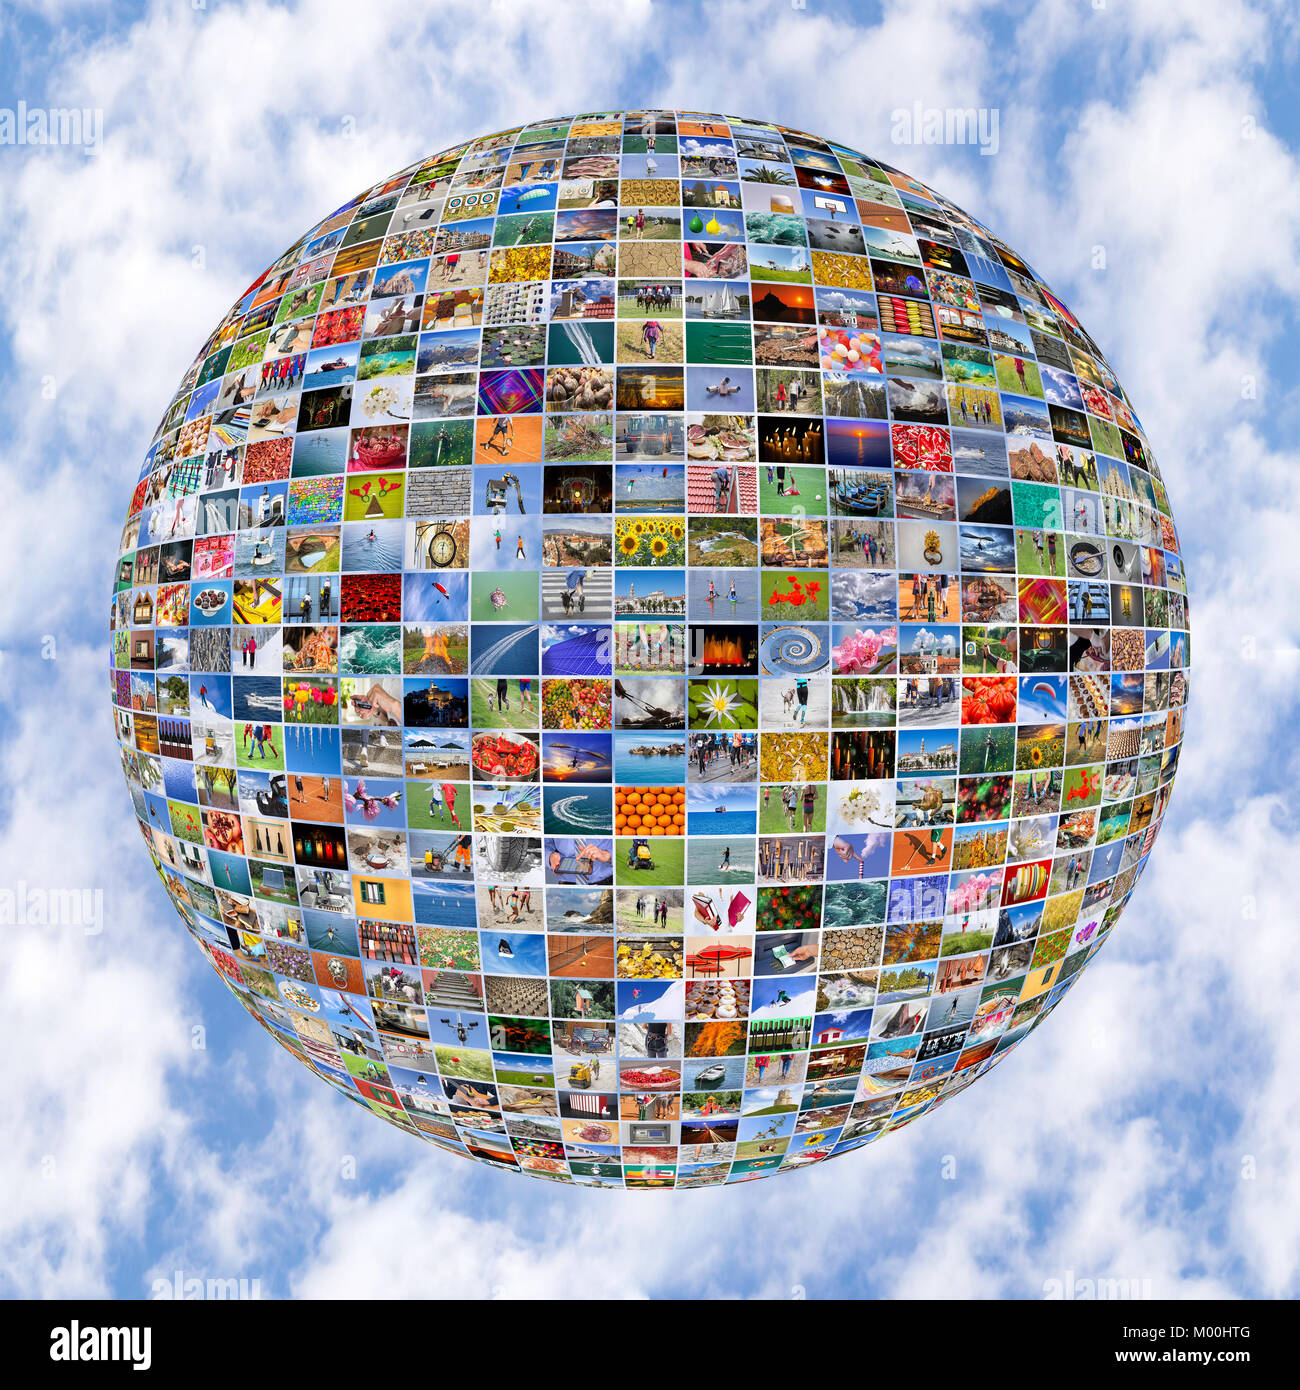 Big Multimedia Video Wall Sphere at tv screens showing living in the world Stock Photo